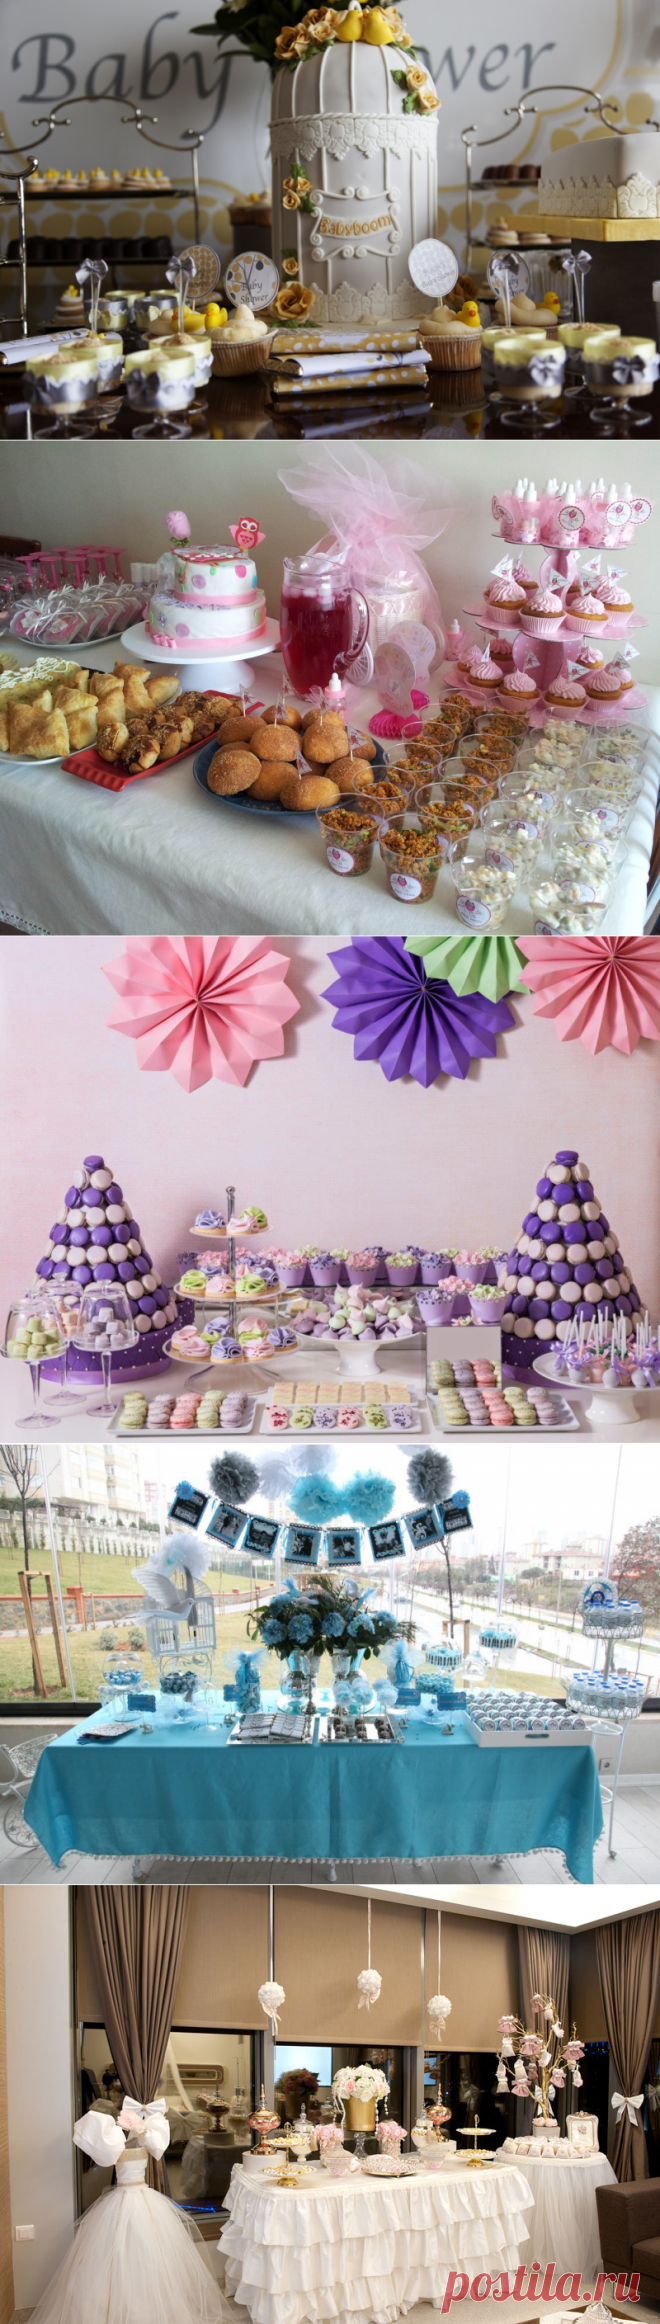 Top 16 Baby Shower Decorations | MostBeautifulThings